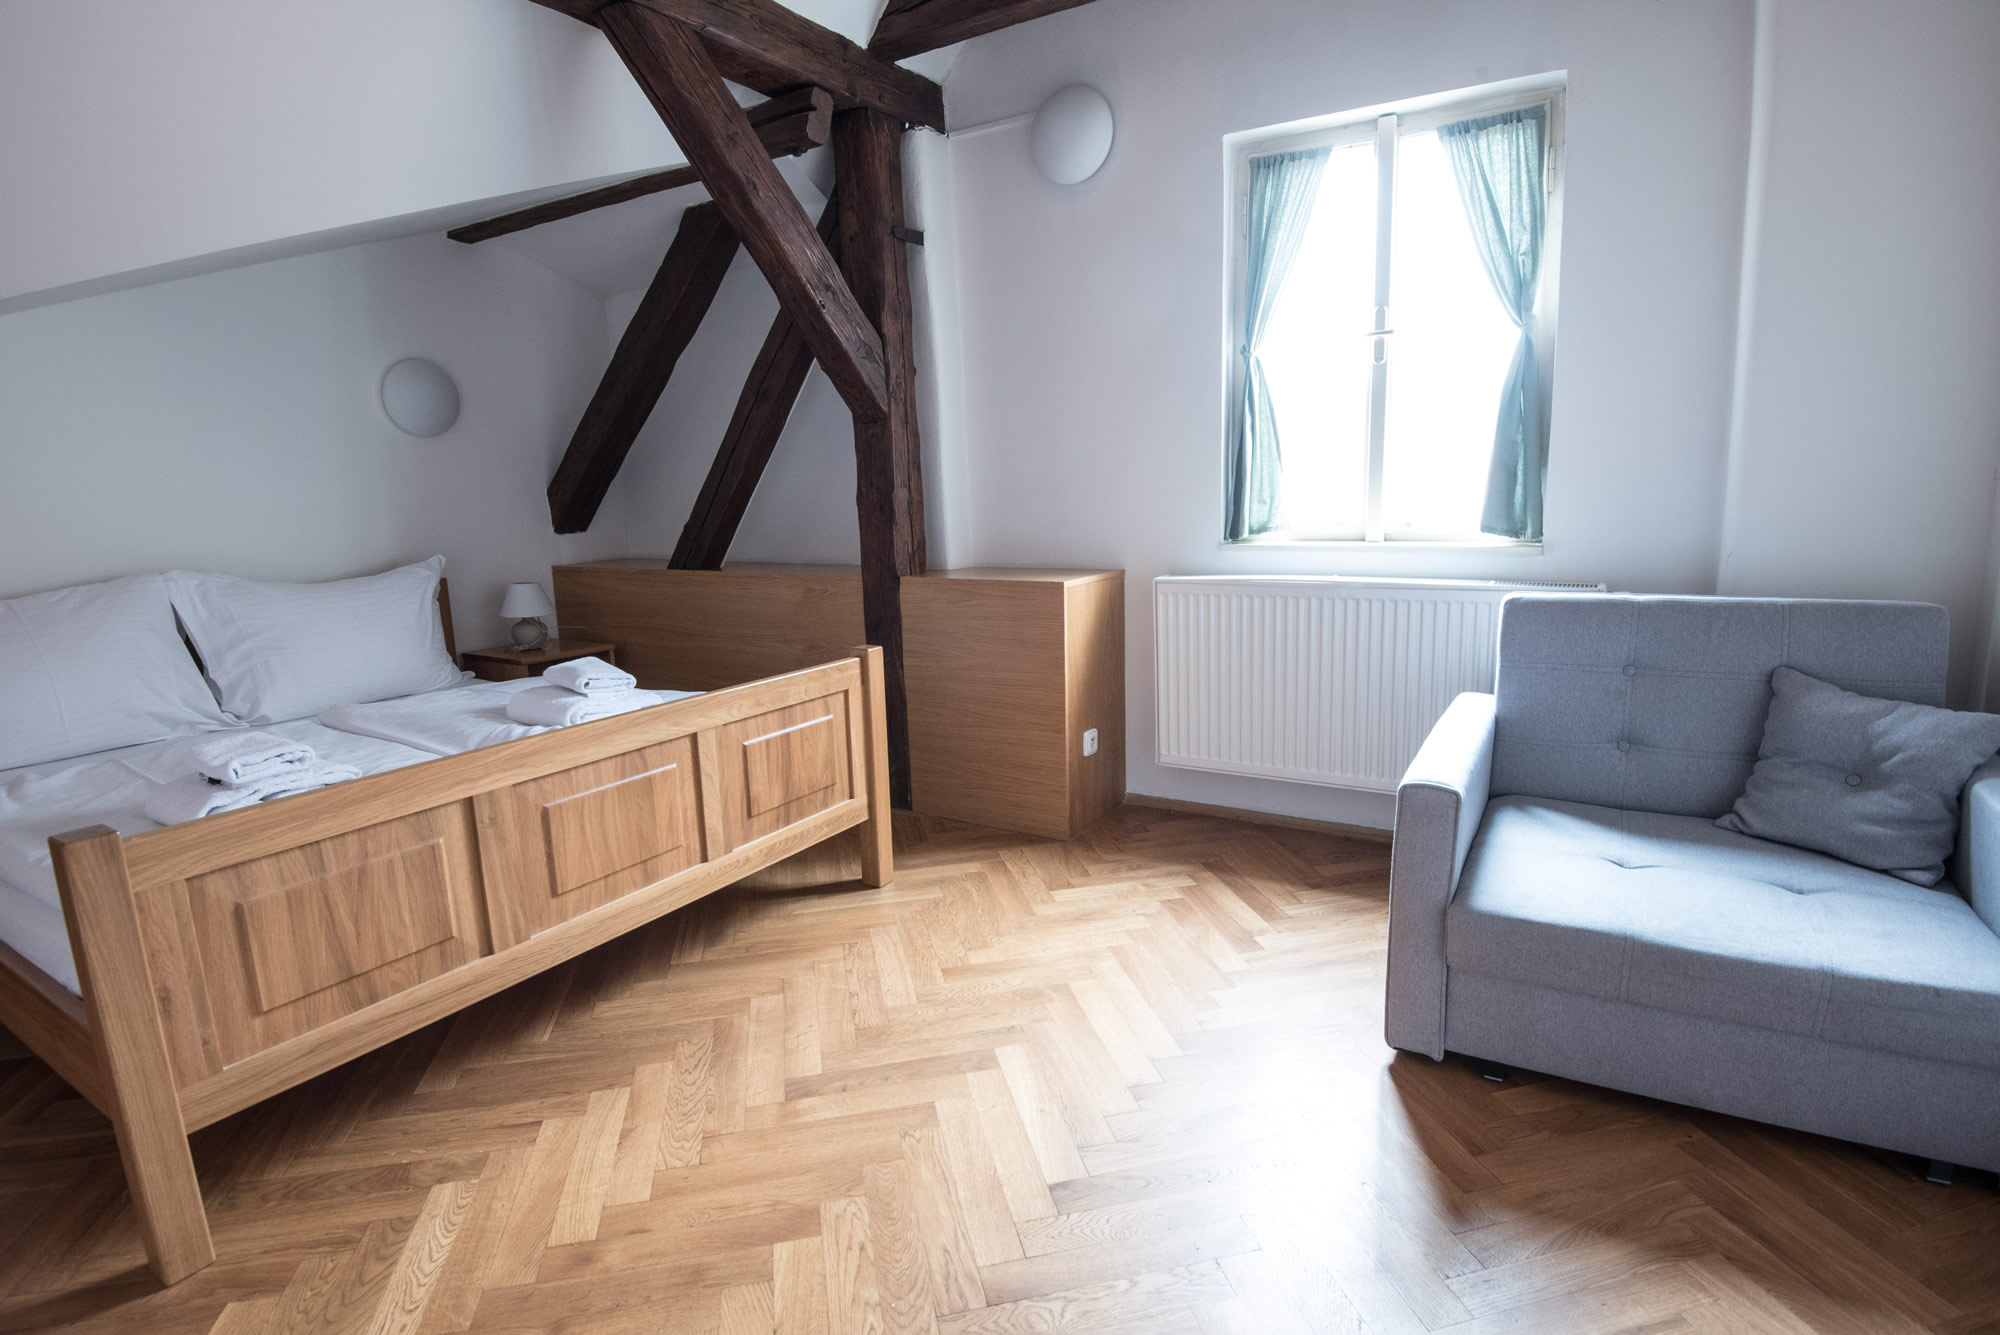 Bedroom in the attic apartment. Wooden bed, wooden floor and small grey sofa chair